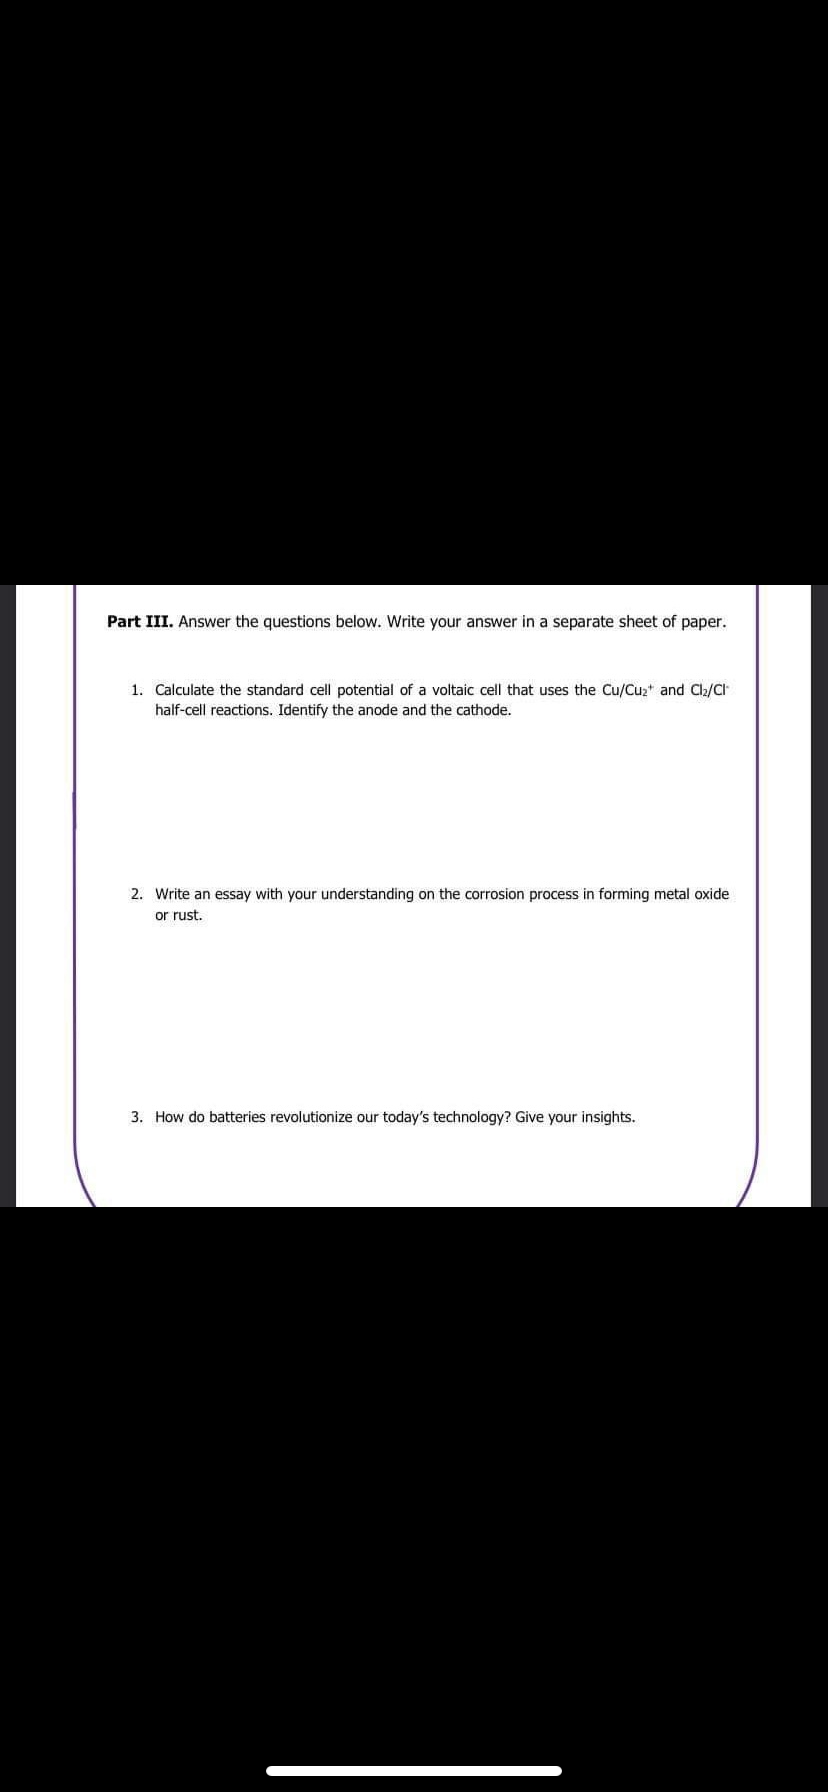 Part III. Answer the questions below. Write your answer in a separate sheet of paper.
1. Calculate the standard cell potential of a voltaic cell that uses the Cu/Cu₂+ and Cl₂/Cl
half-cell reactions. Identify the anode and the cathode.
2. Write an essay with your understanding on the corrosion process in forming metal oxide
or rust.
3. How do batteries revolutionize our today's technology? Give your insights.